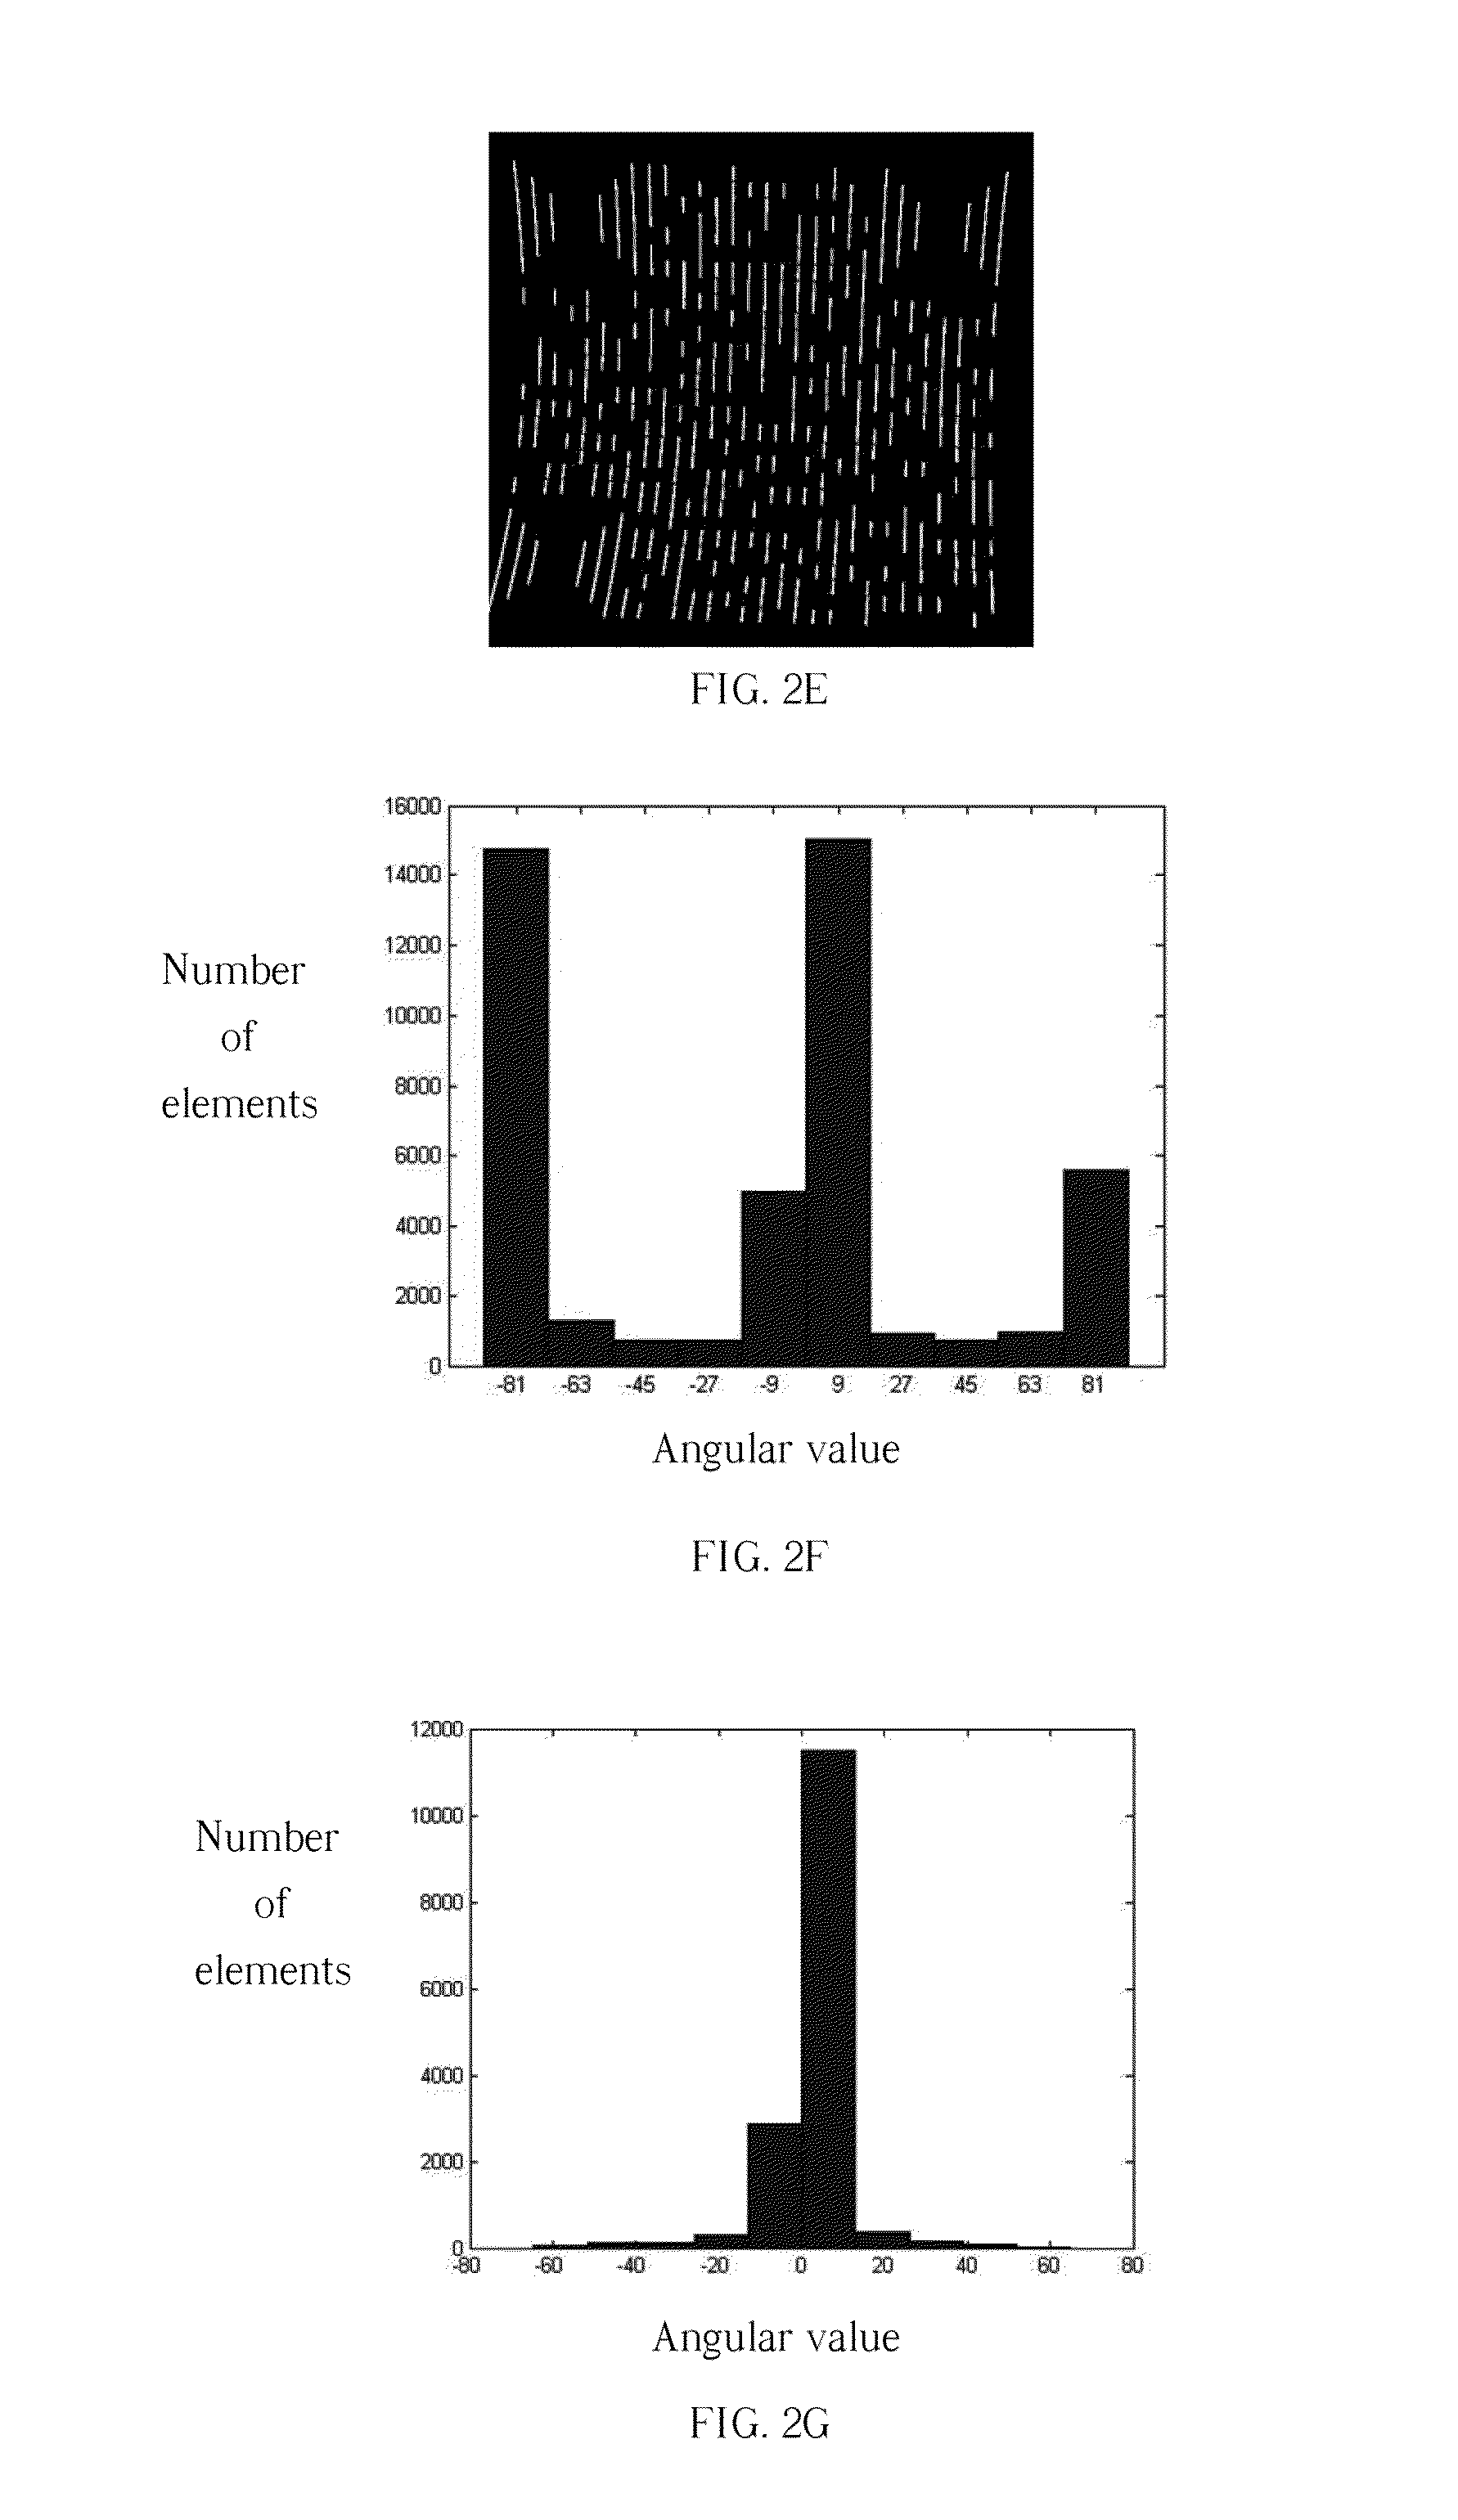 Method for auto-depicting trends in object contours